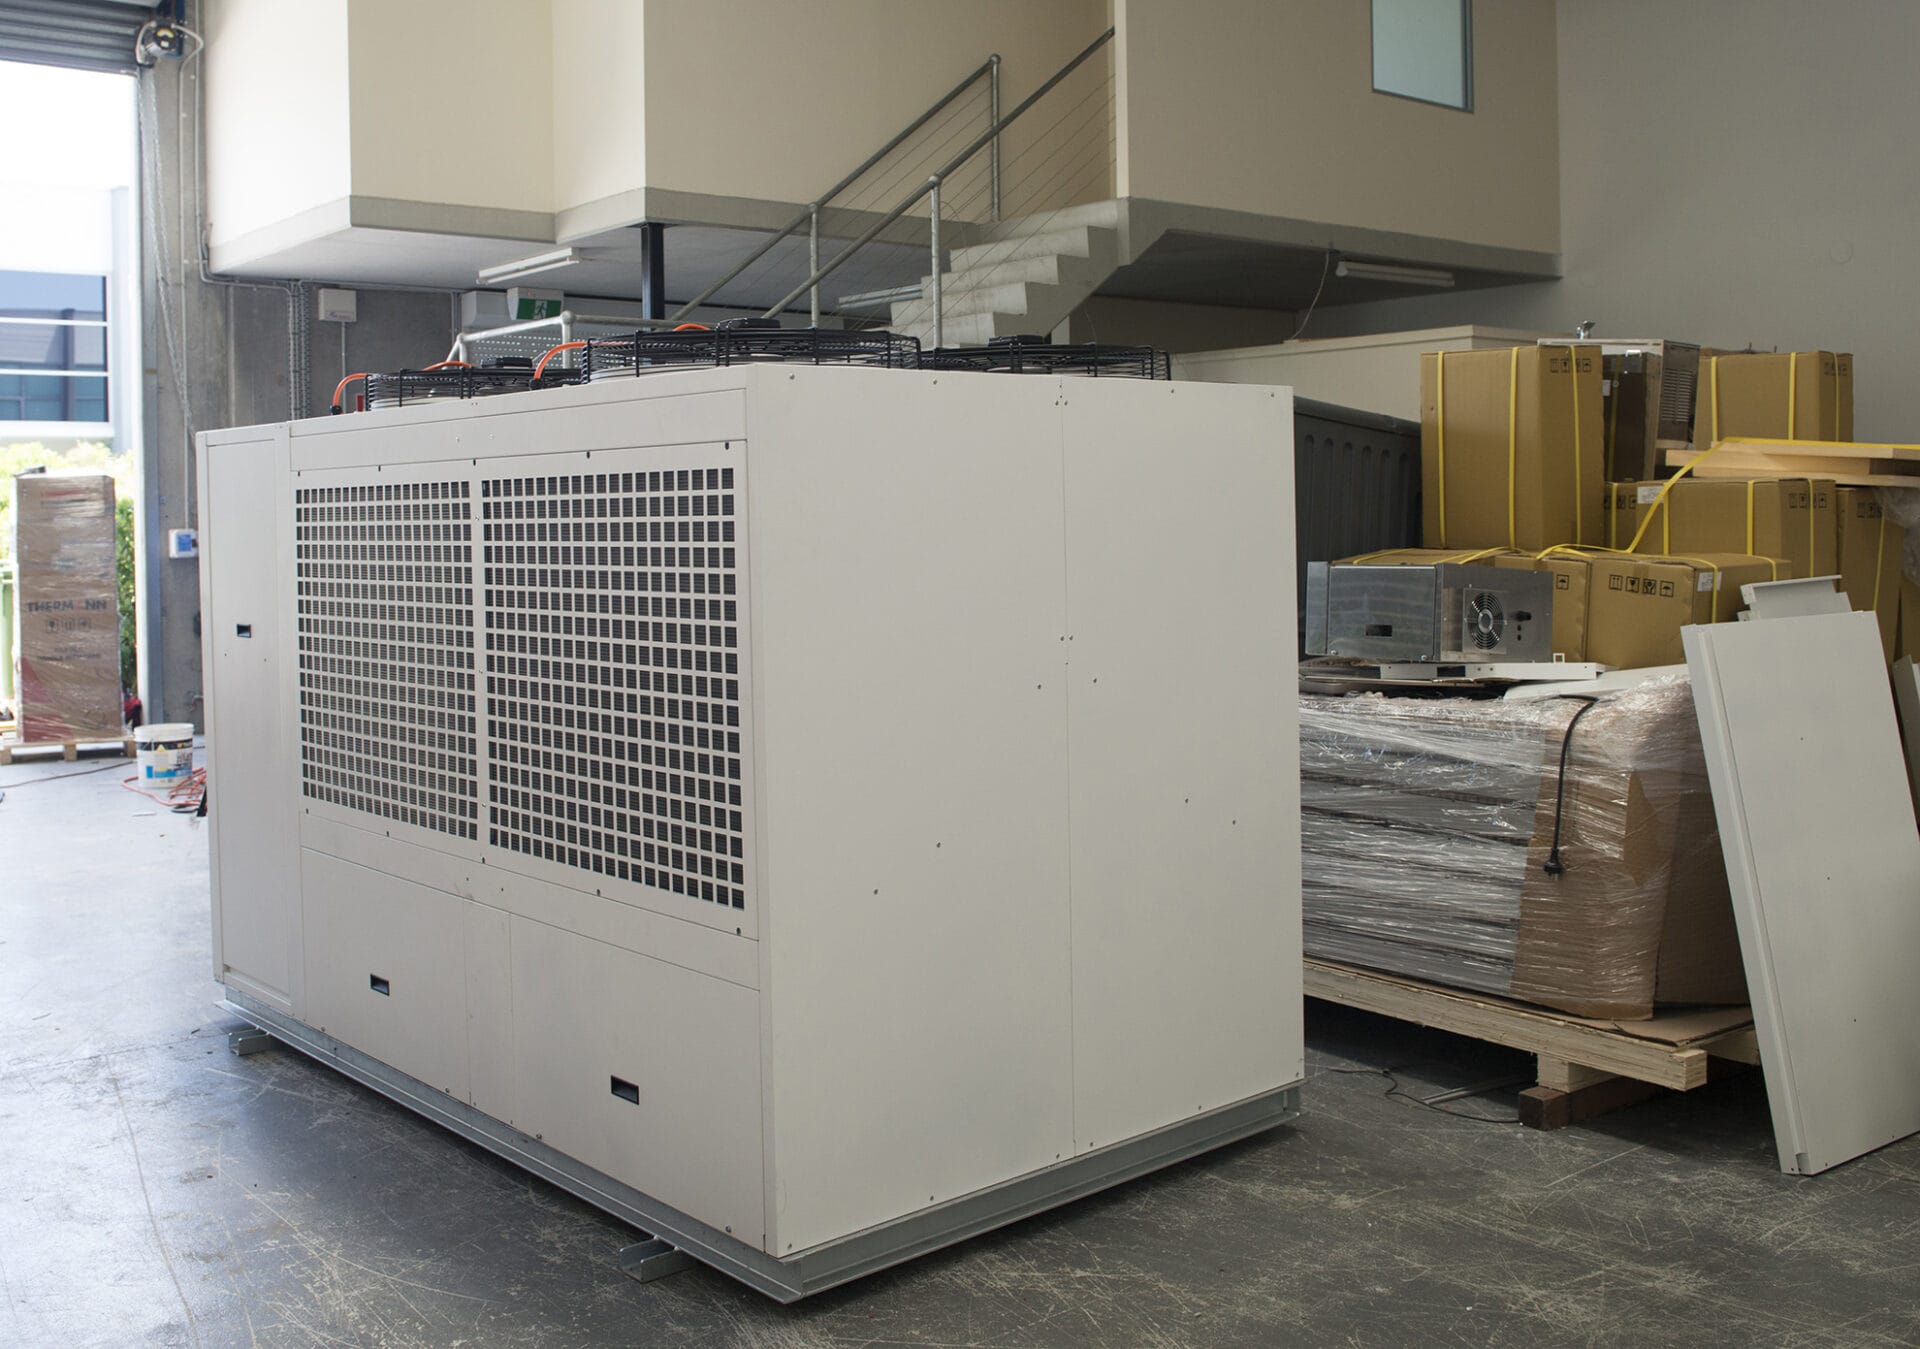 Refrigerated Air Conditioning vs. Evaporative Cooling